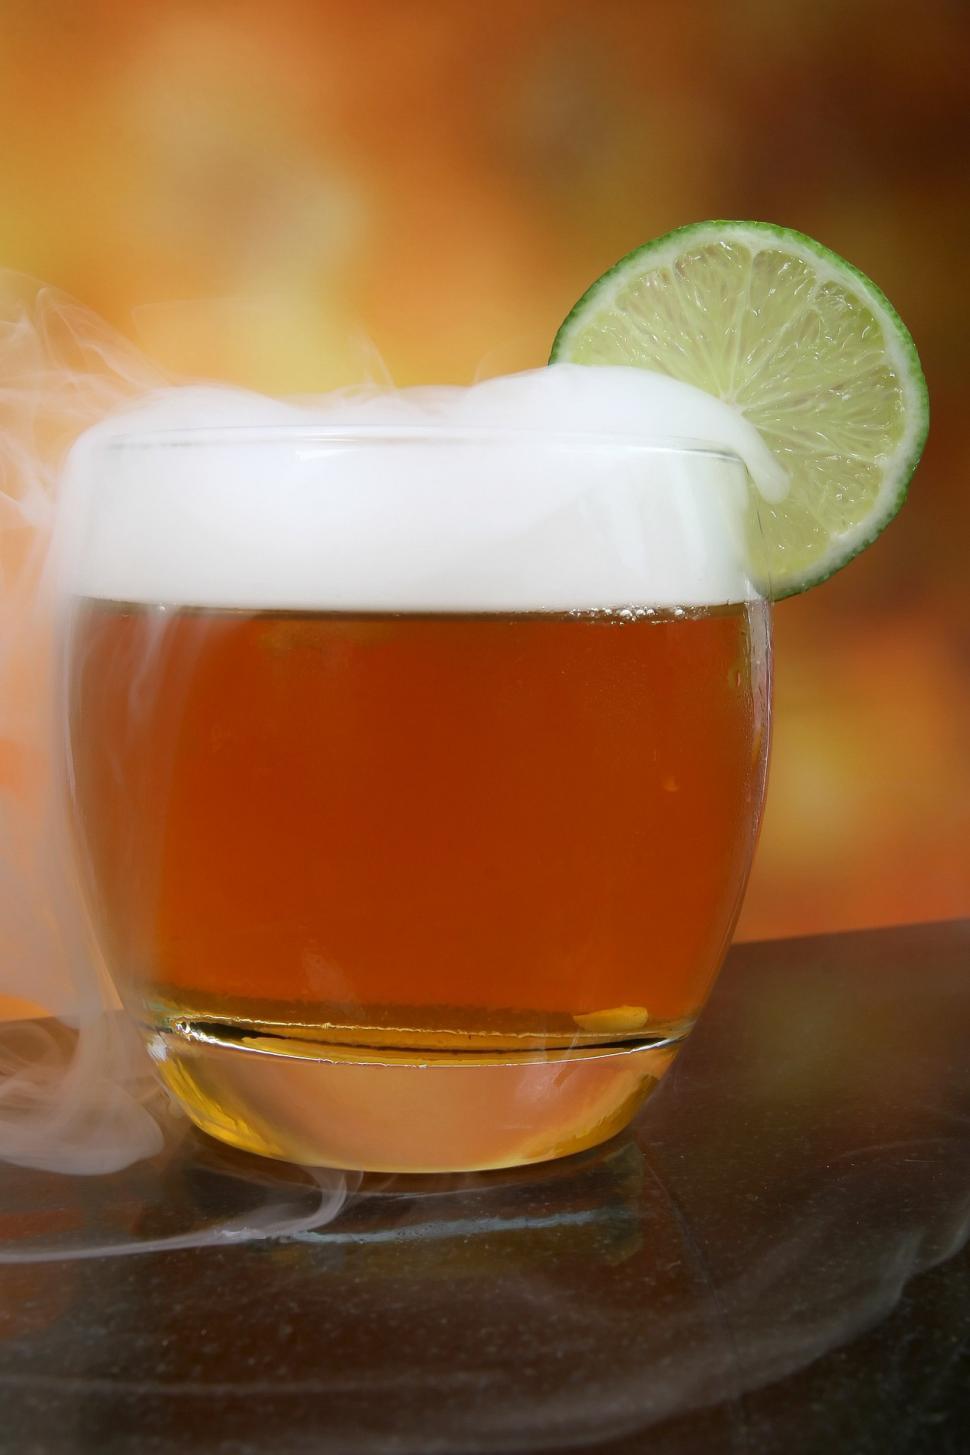 Free Image of Glass of Beer With Lime Wedge 